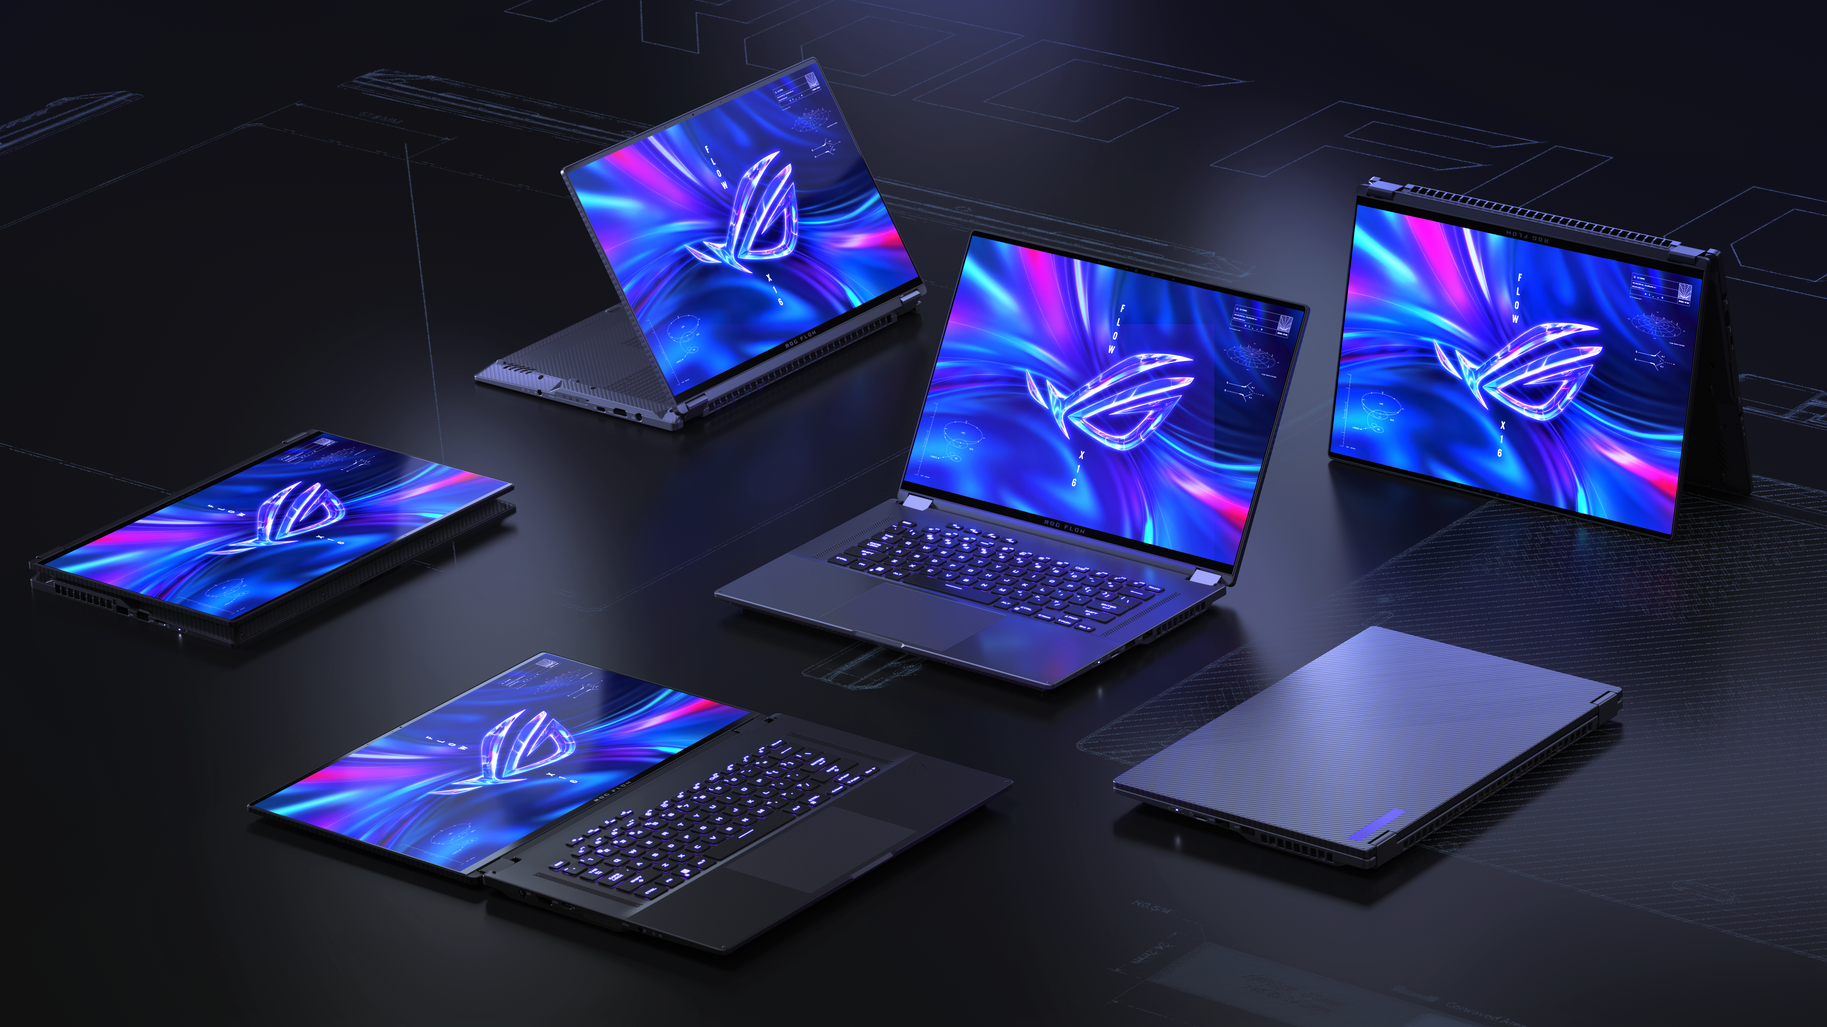 With ROG Flow X16, Asus launches a powerful convertible game